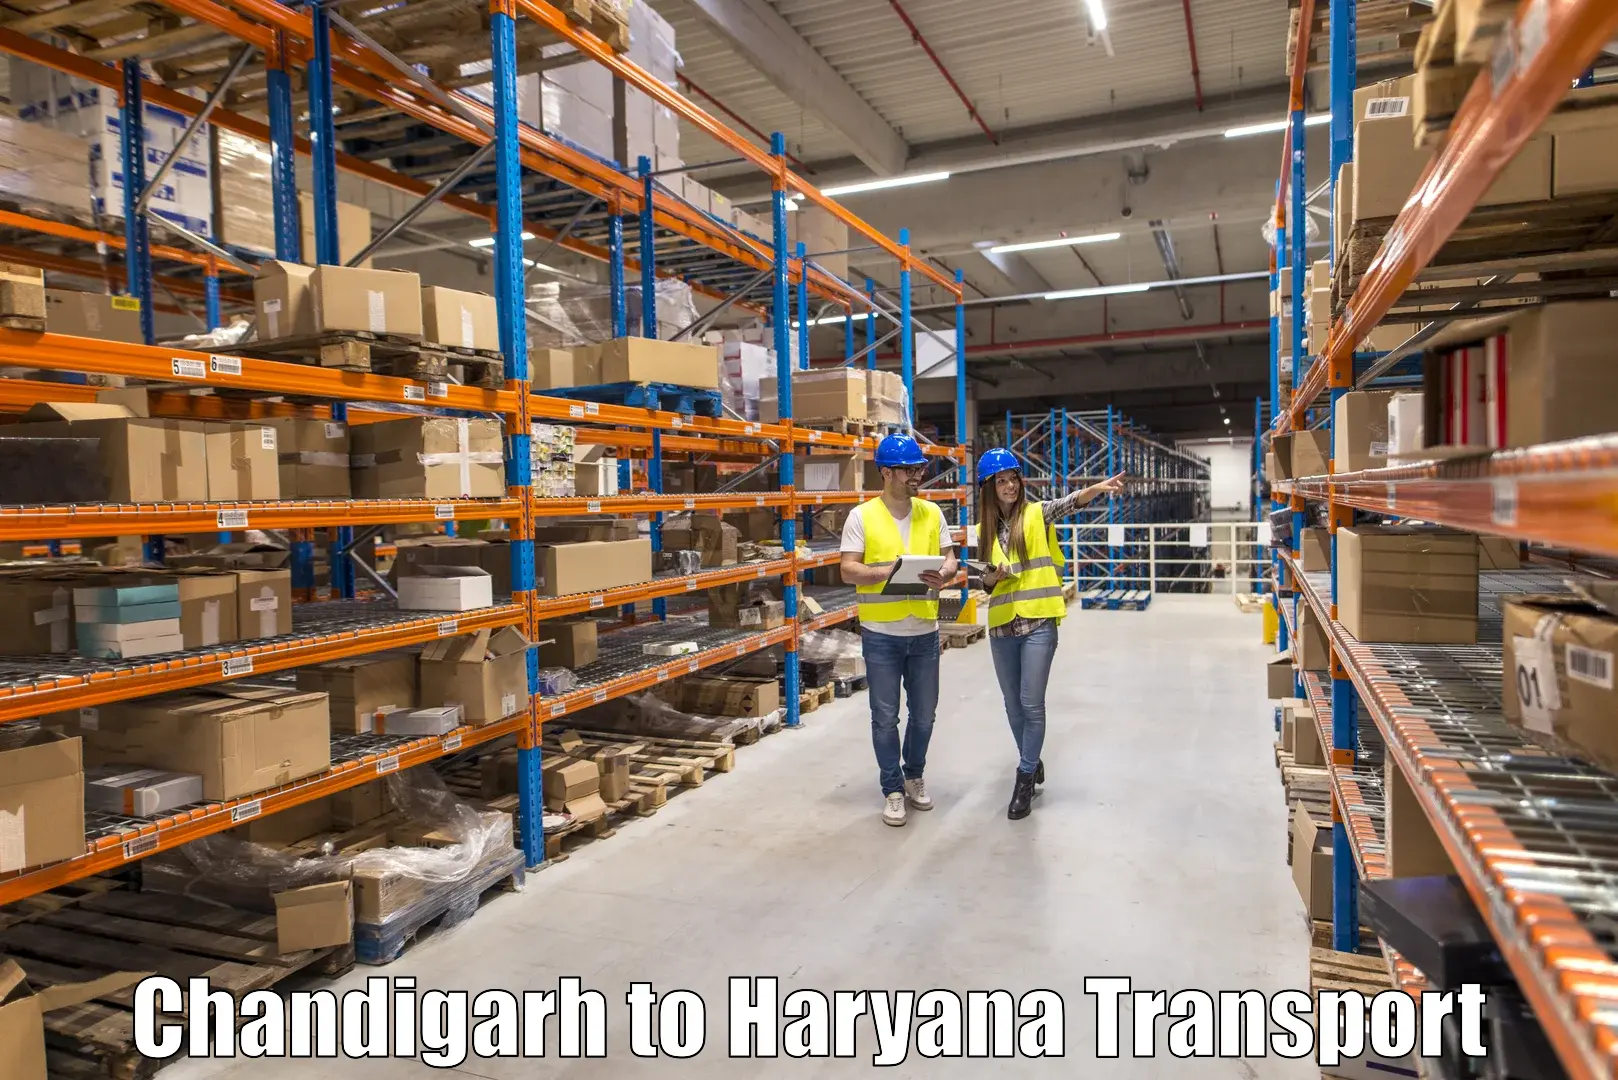 Express transport services Chandigarh to Haryana